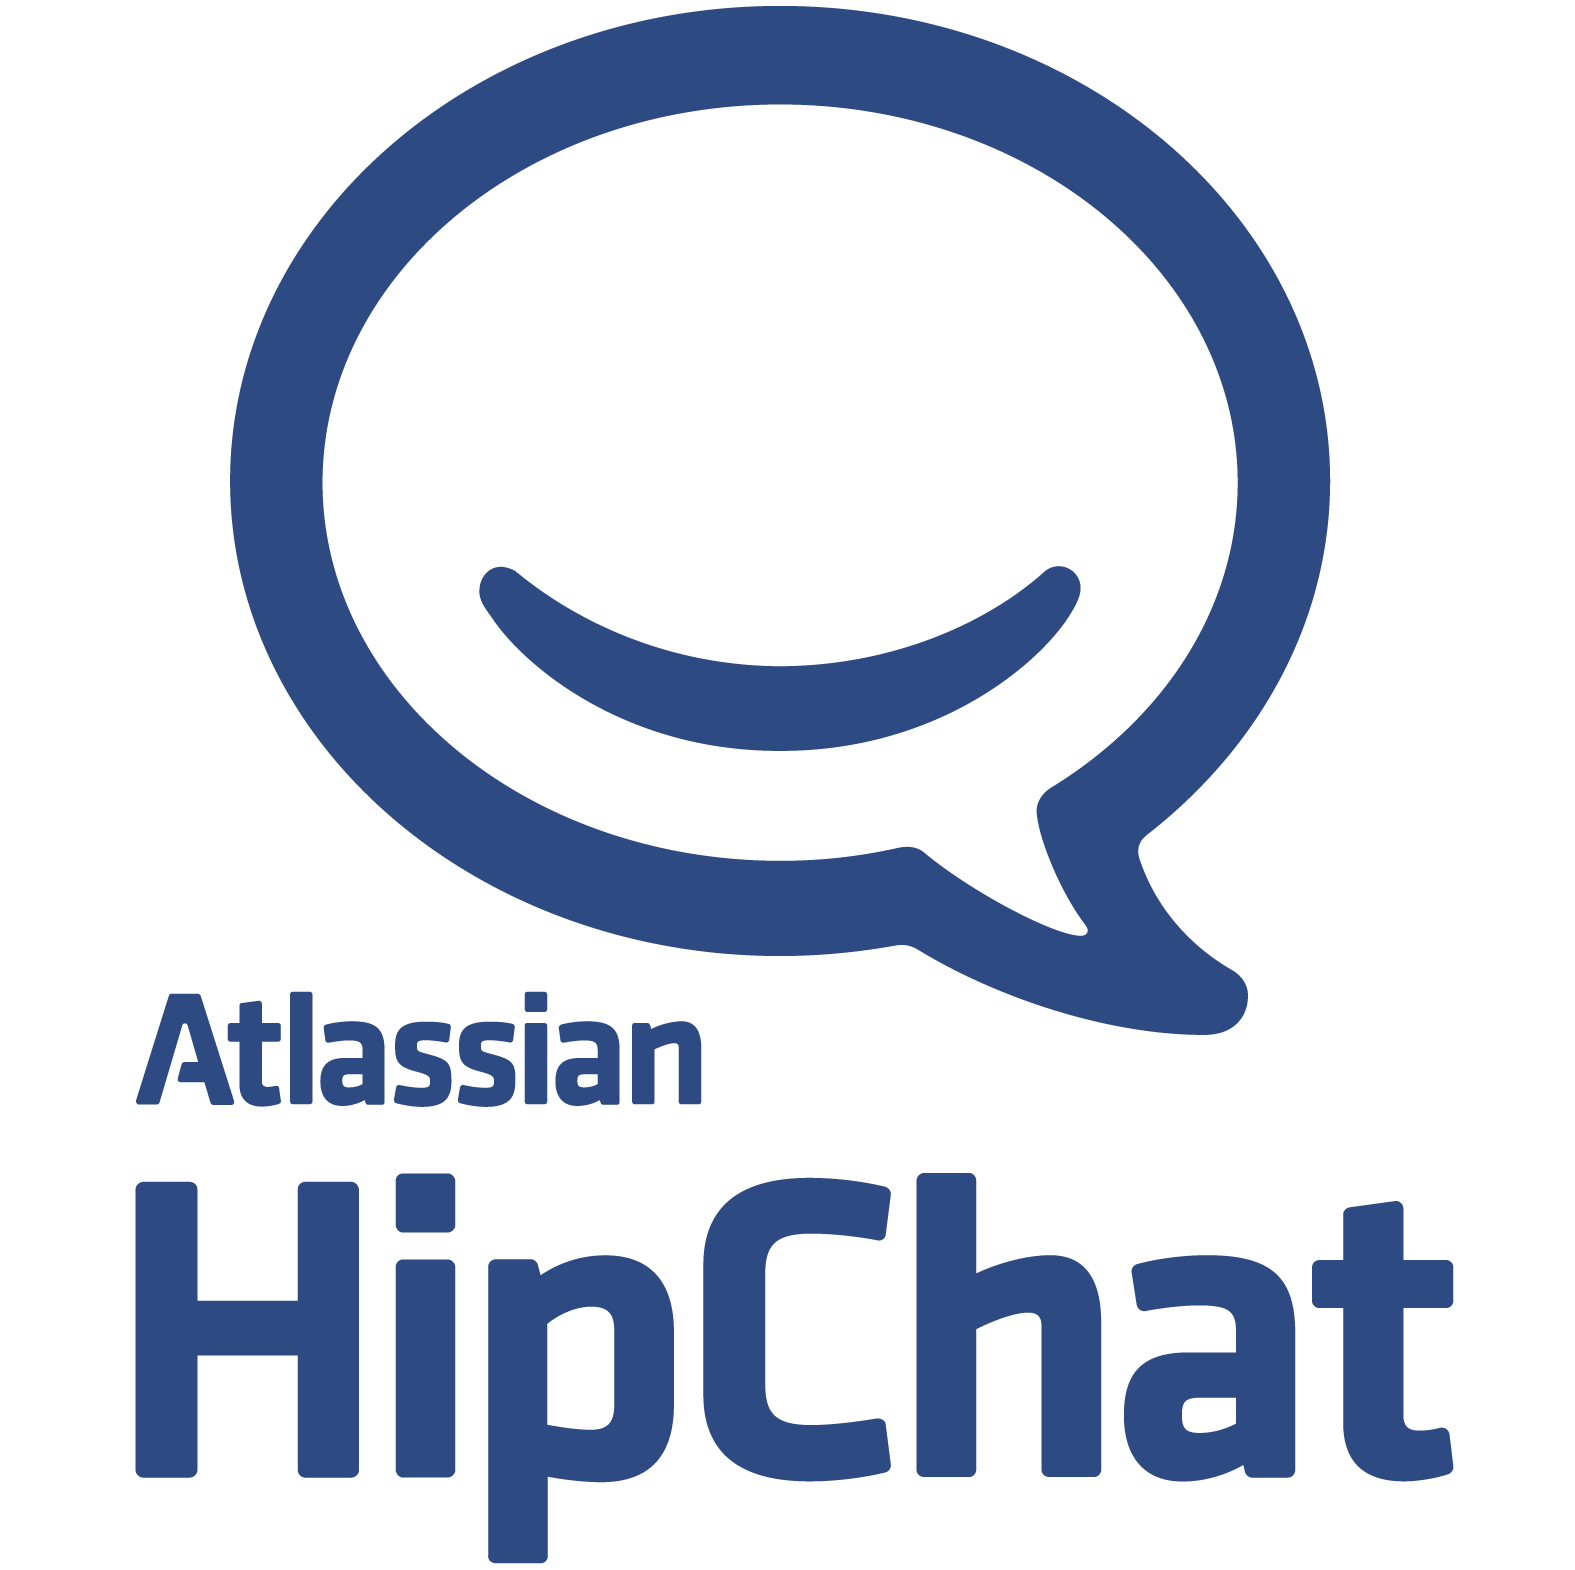 hipchat download instructions